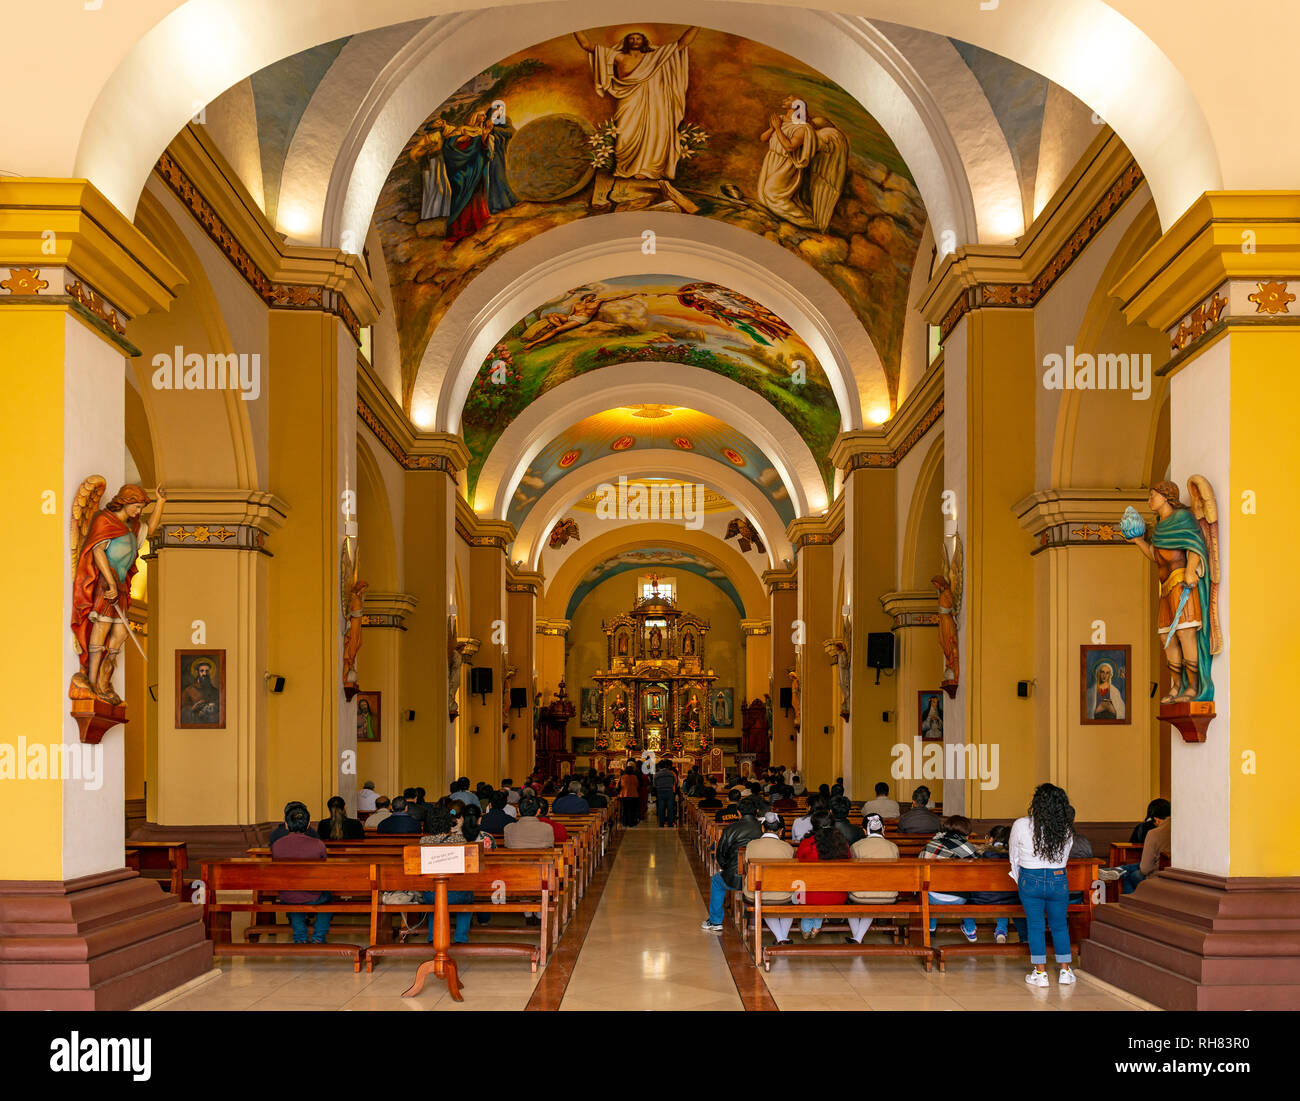 People attending mass inside the baroque style Cathedral Basilica of Saint Mary in Trujillo, Peru. Stock Photo